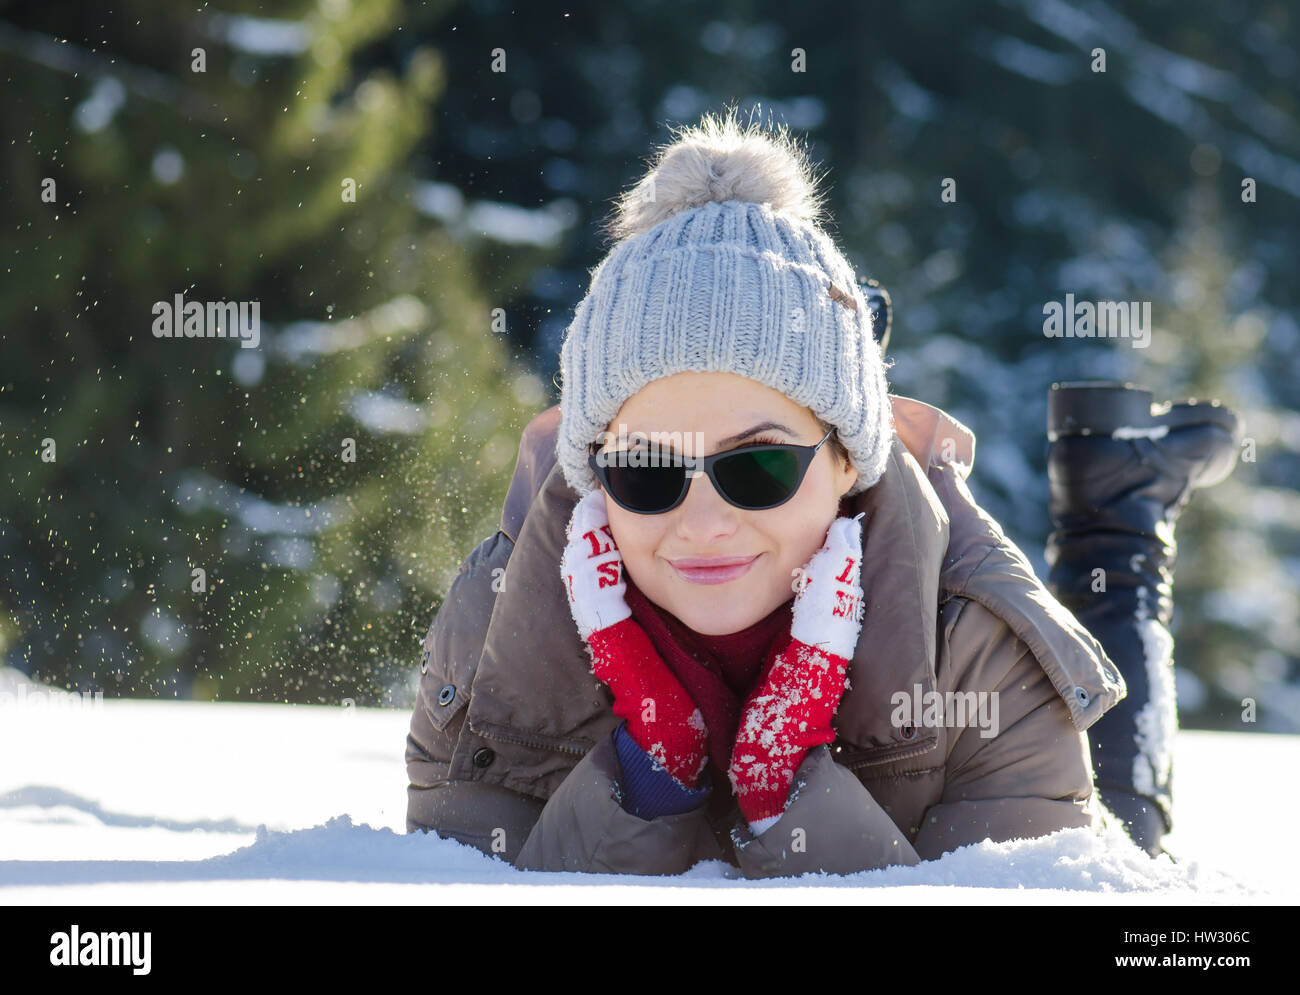 Happy woman having fun in snow lay with red wool gloves and sunglasses while snowing Stock Photo